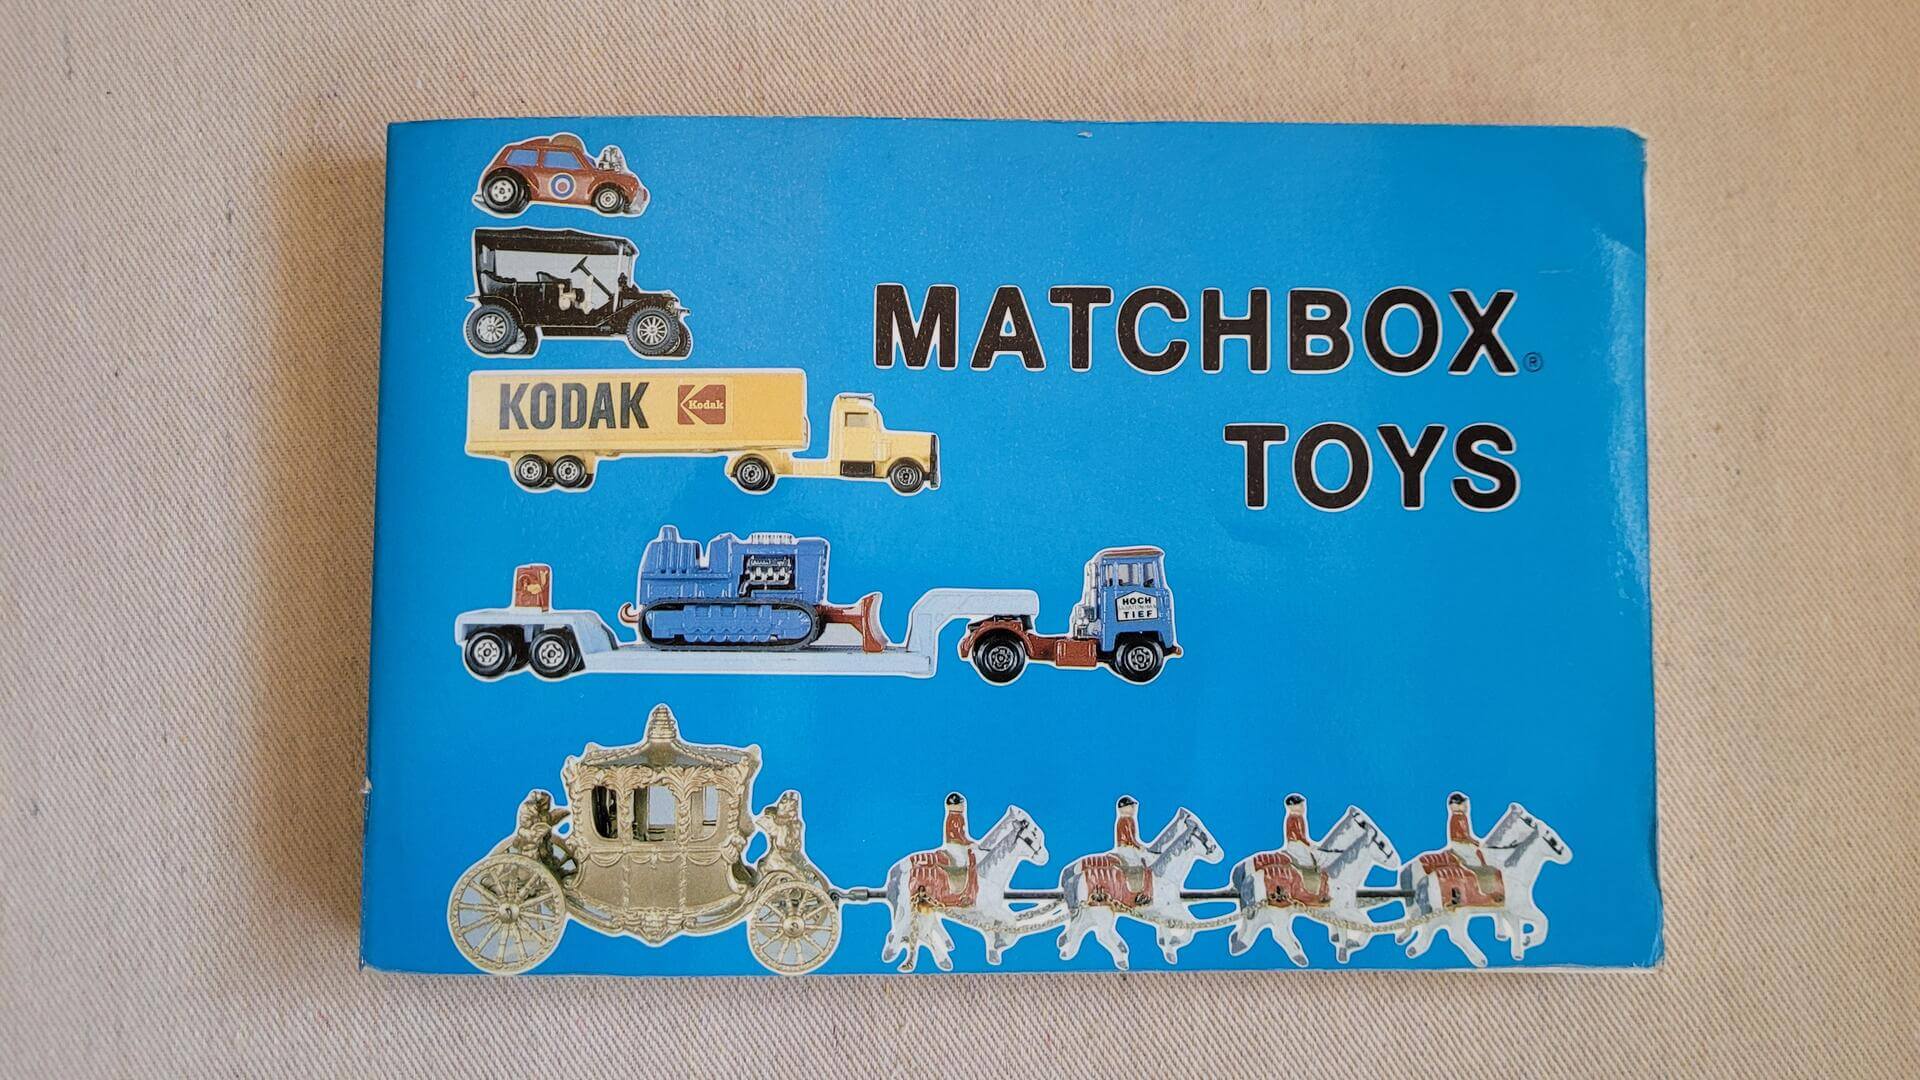 1983 Matchbox Toys price guide book by Nancy Schiffer. Vintage collector reference and guide book on diecast metal toy car models